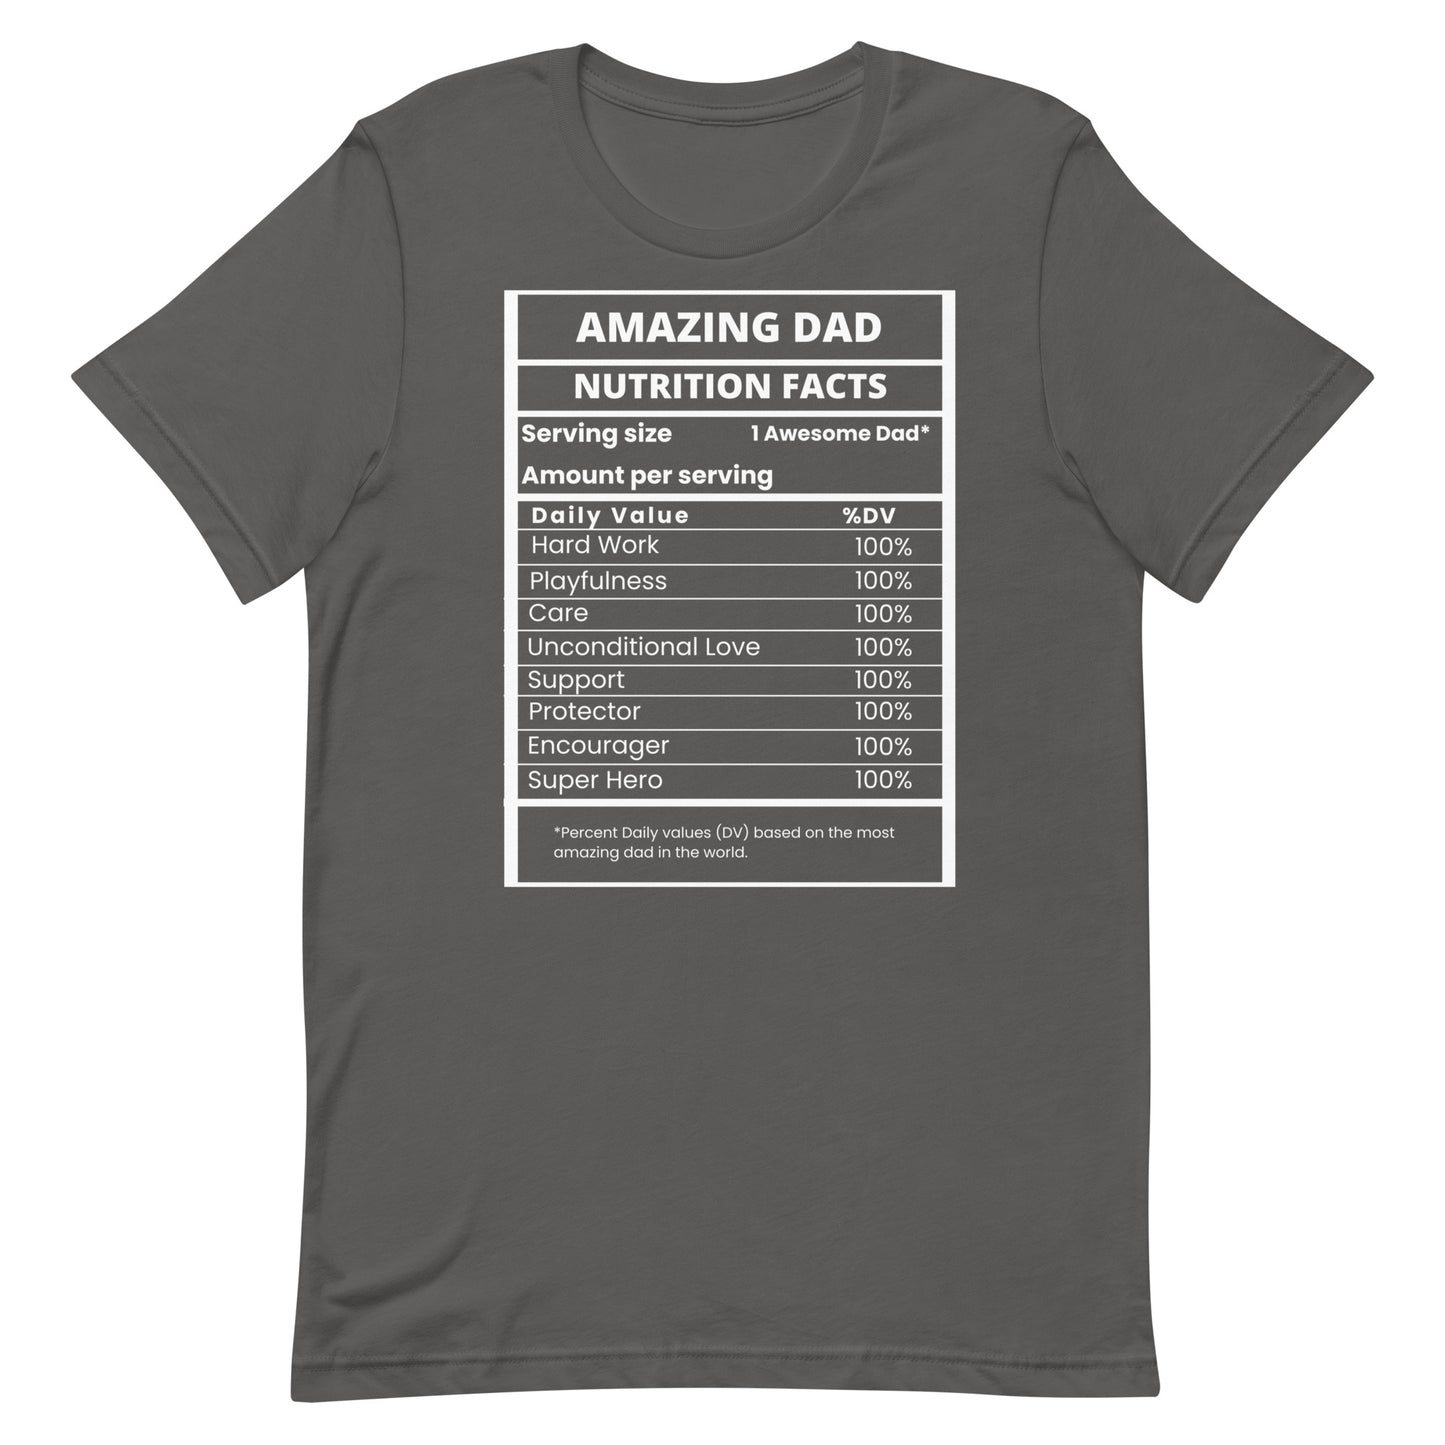 "Amazing Dad" Nutritional Facts Gift for Dad - Father's Day